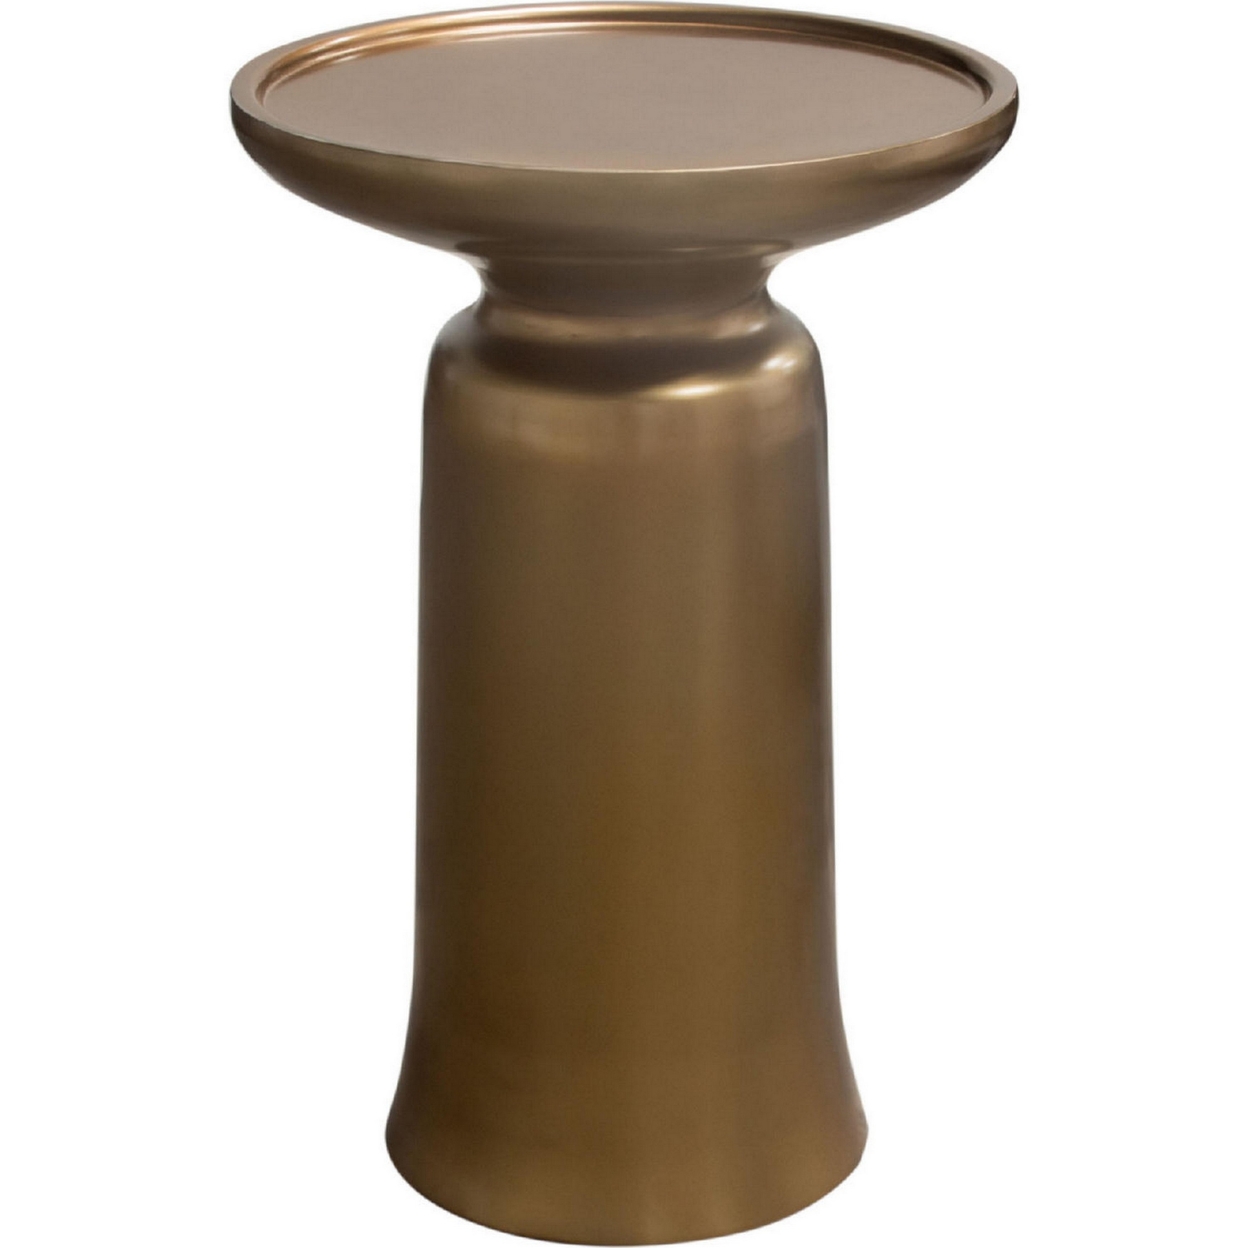 23 Inch Modern Accent Table, Matte Gold, Sculpted, Raised Tray Edges - Saltoro Sherpi